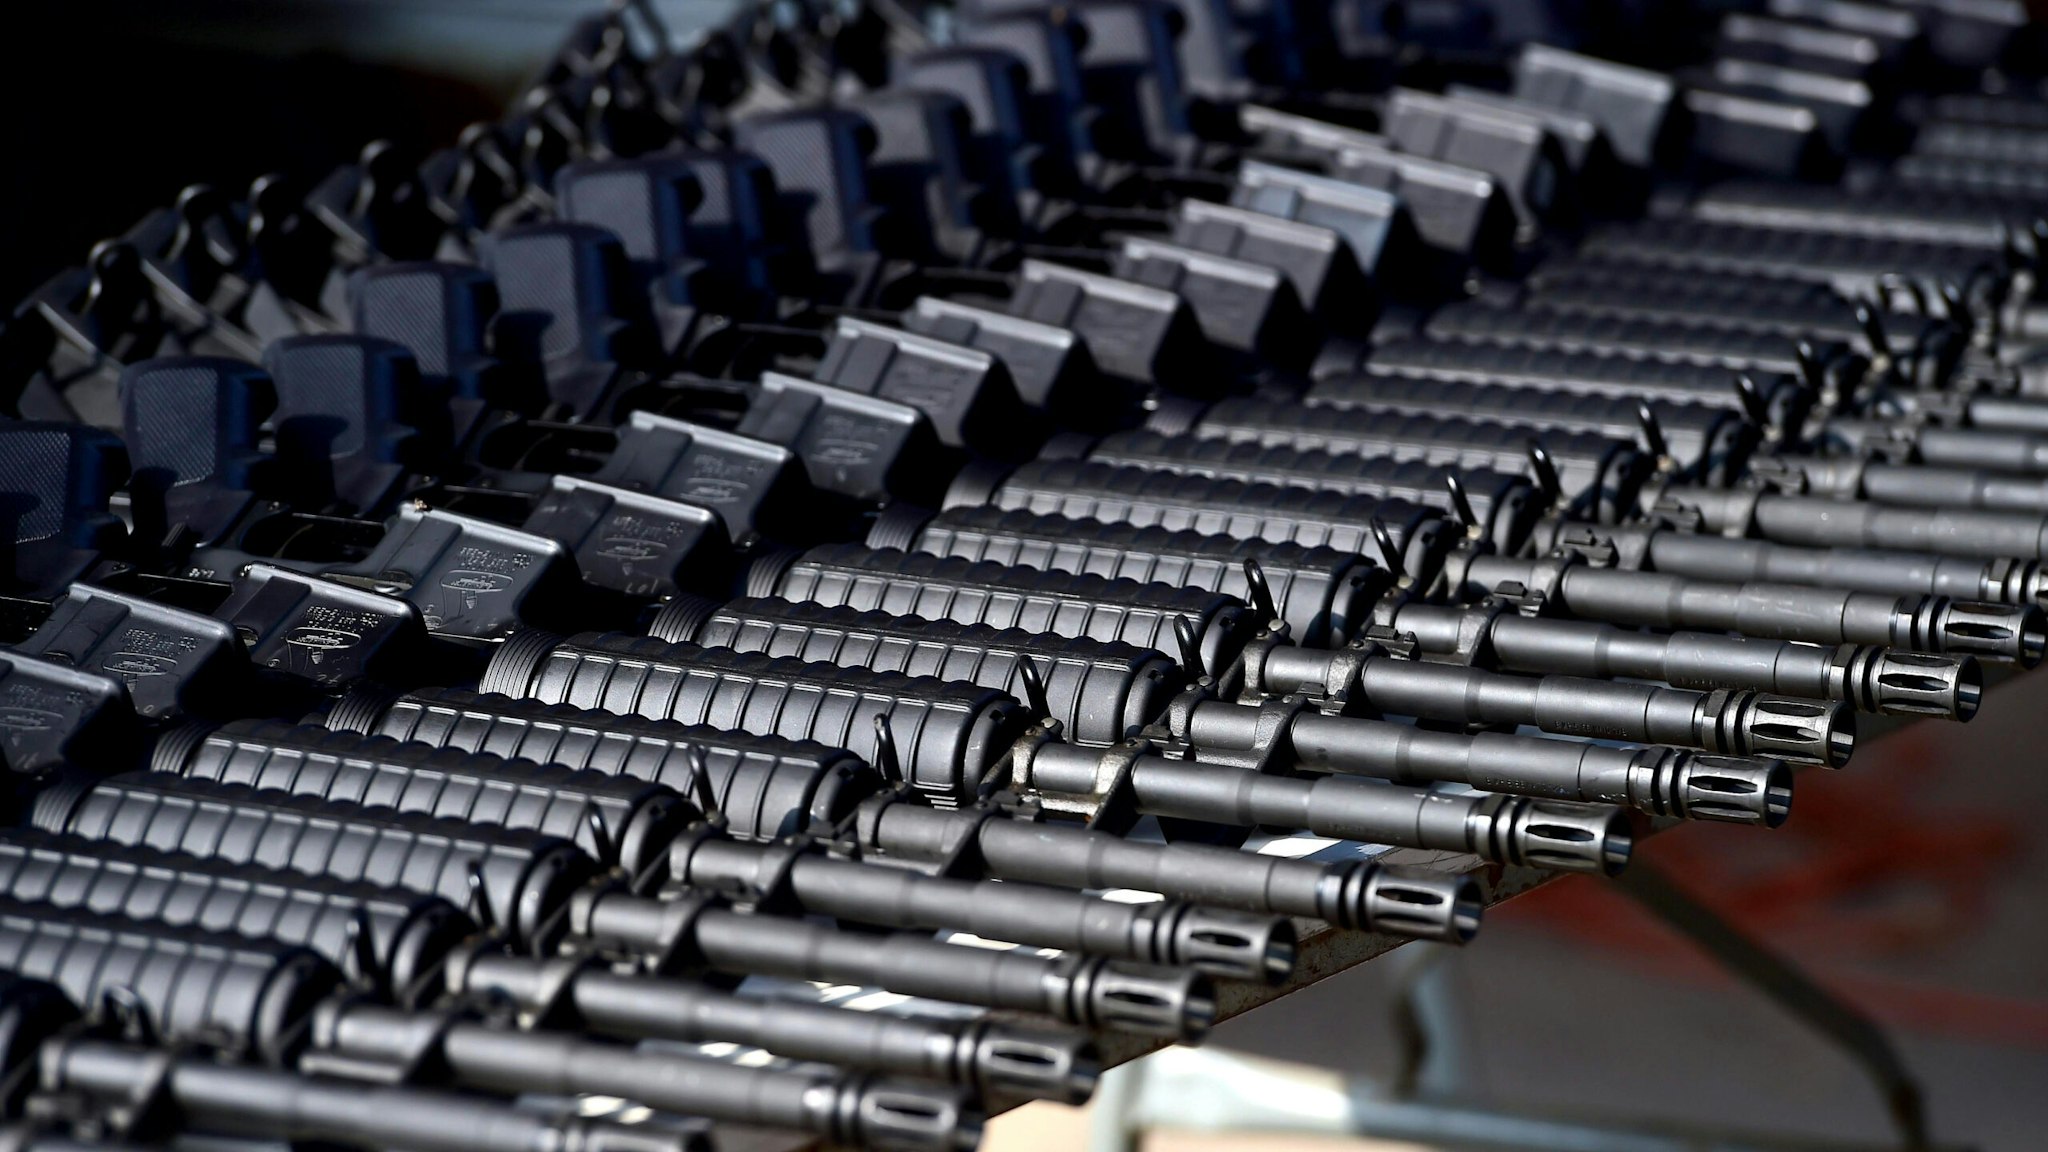 AR-15 assault rifles to be delivered to the newly created rural police, in Tepalcatepec, Michoacan State, Mexico, on May 10, 2014.